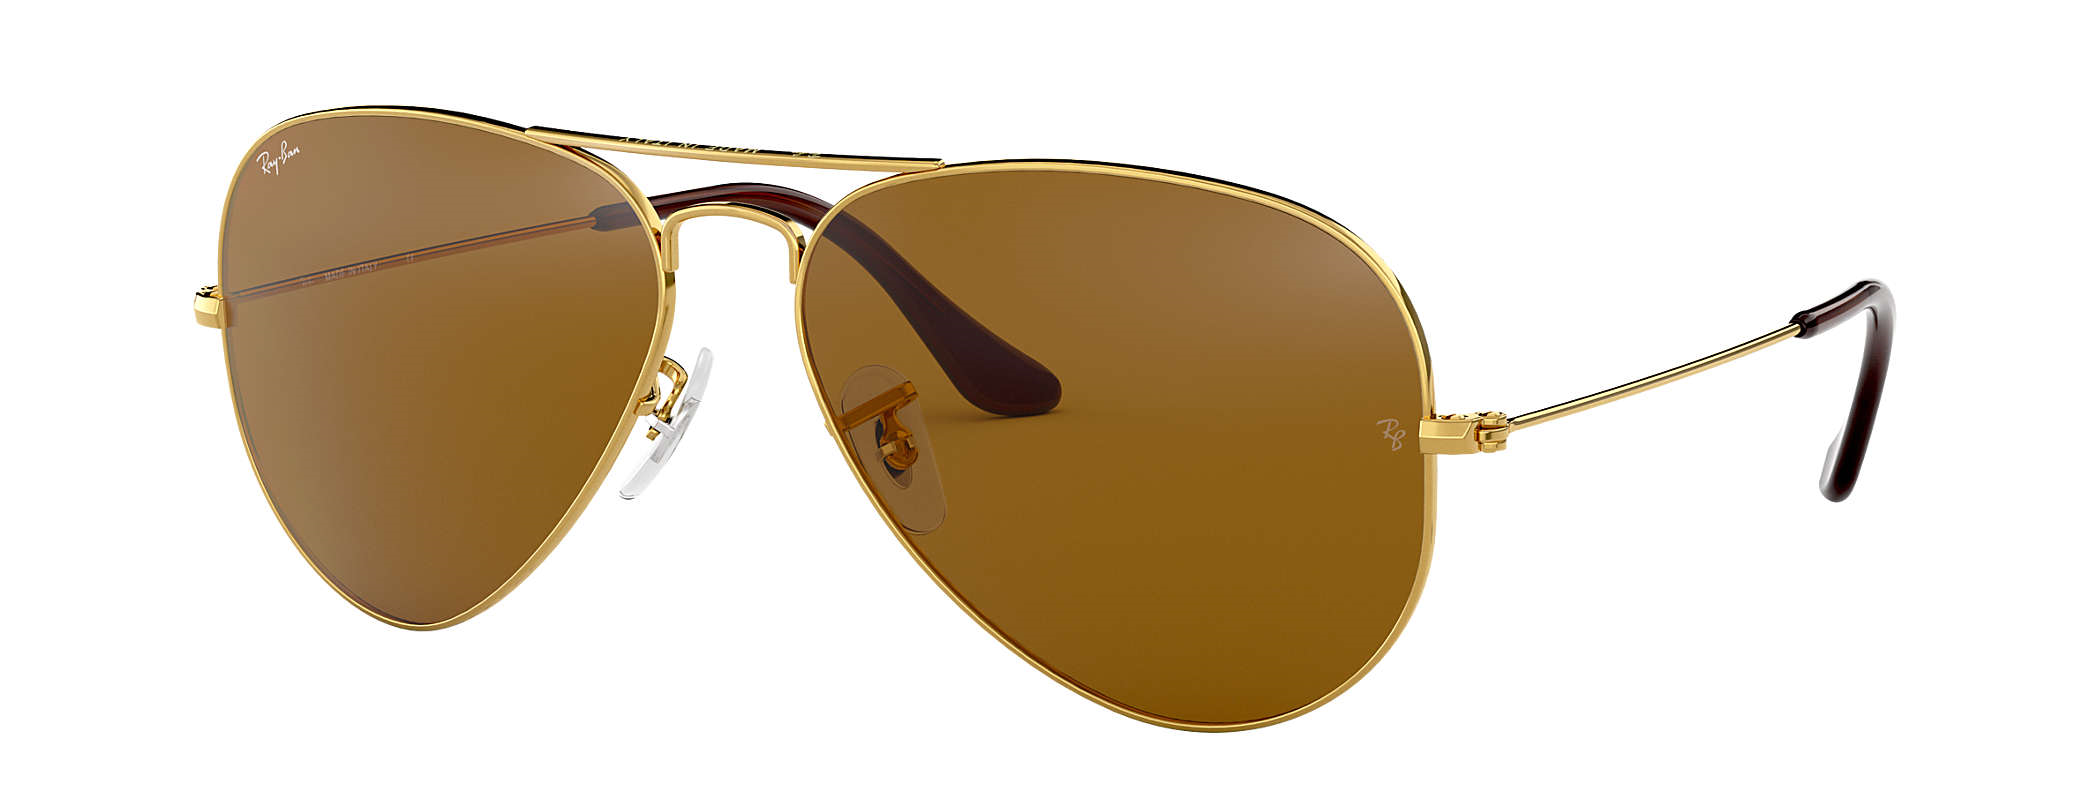 Ray-Ban RB3025 62mm eye size in gold with crystal brown lenses 